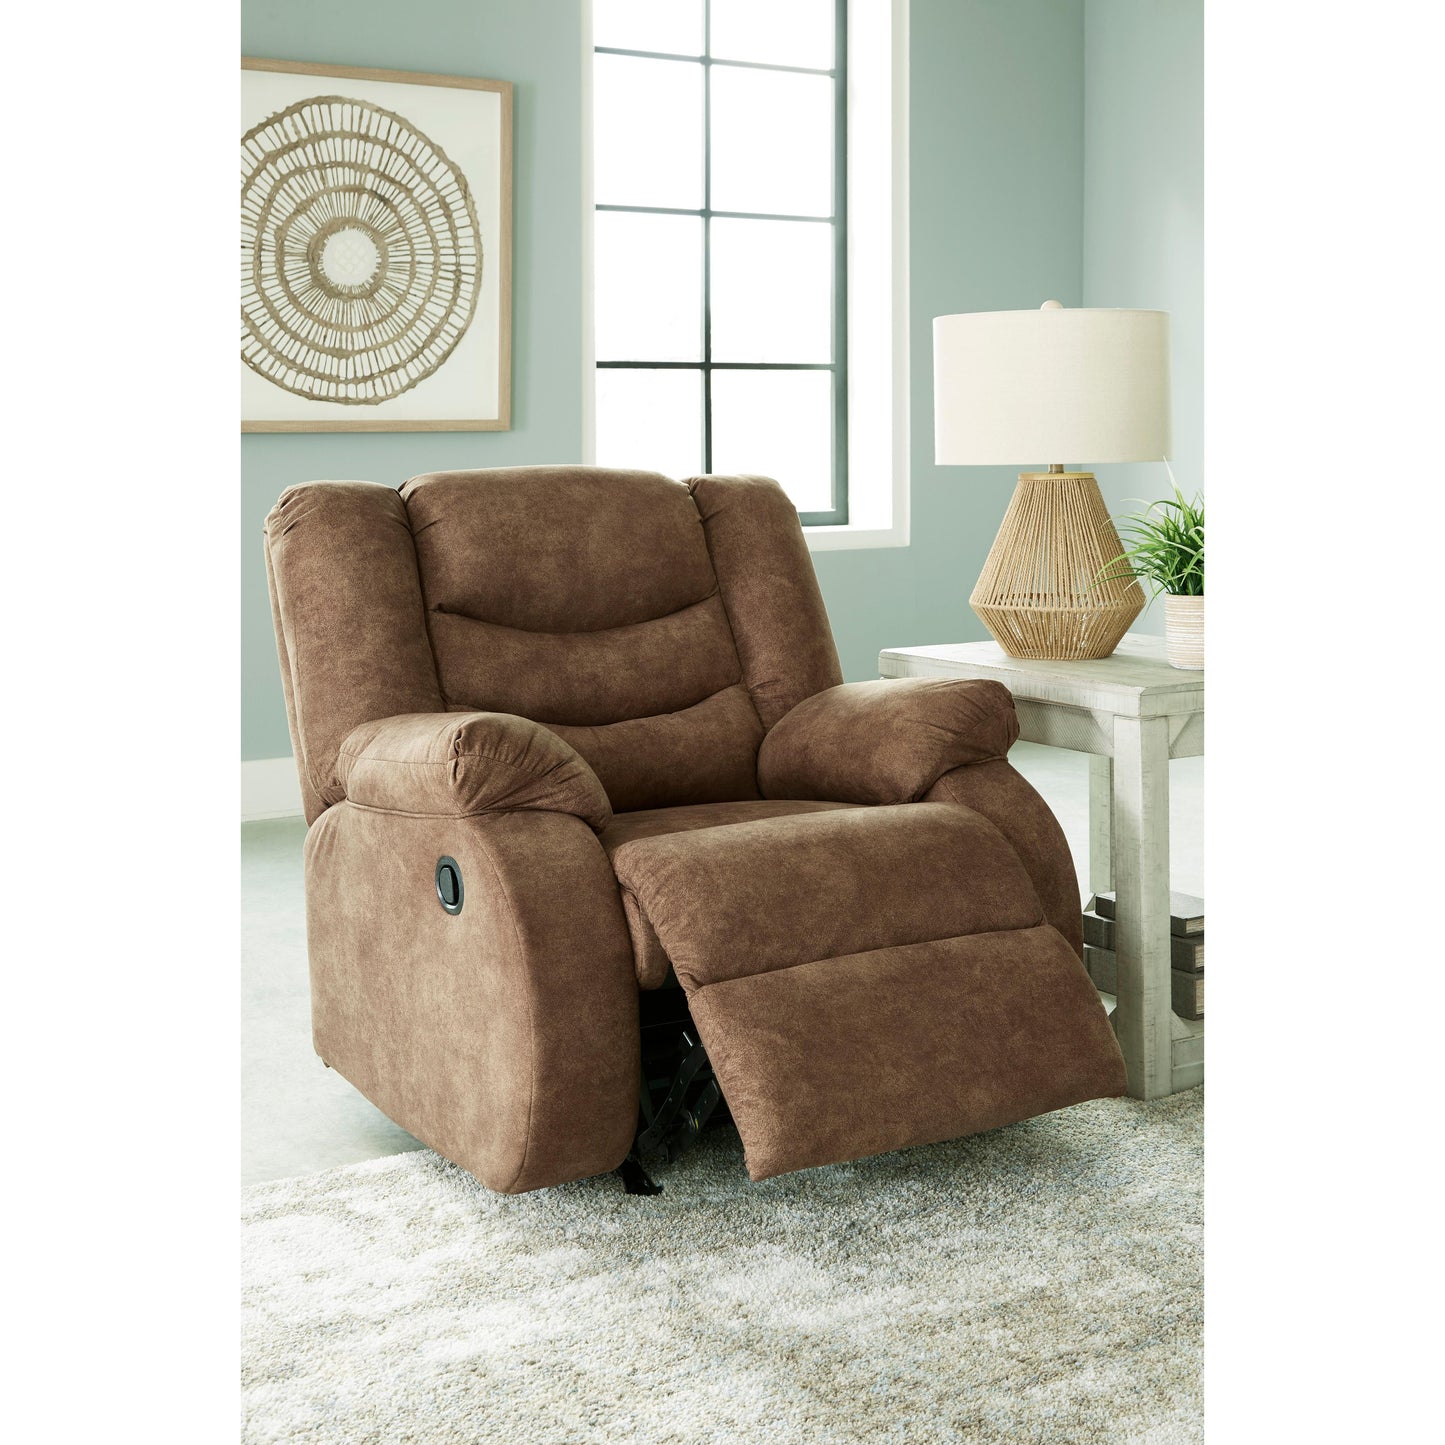 Signature Design by Ashley Partymate Rocker Leather Look Recliner 3690225 IMAGE 7